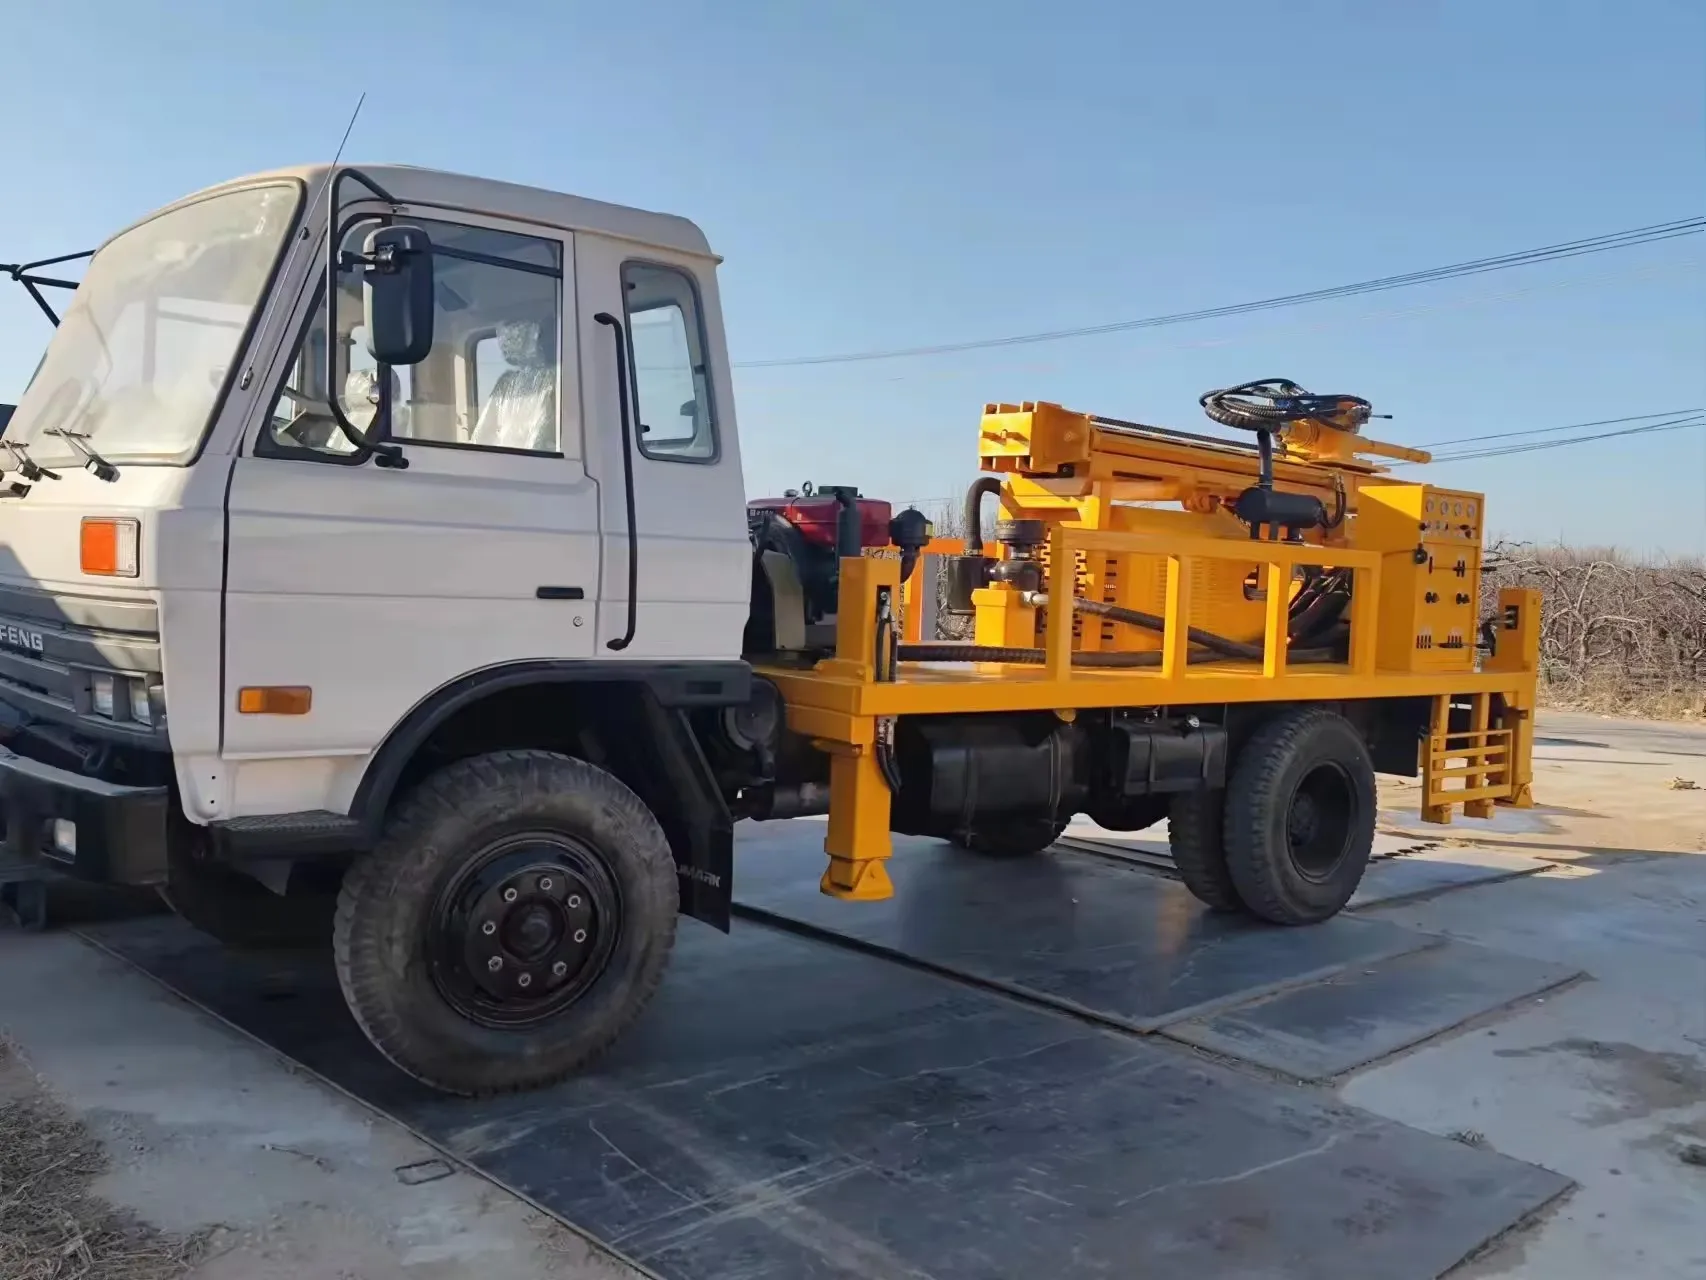 Hongwuhuan HWH260 Portable Air Well Drilling Machine New Condition Portable Rotary Rig Good Price